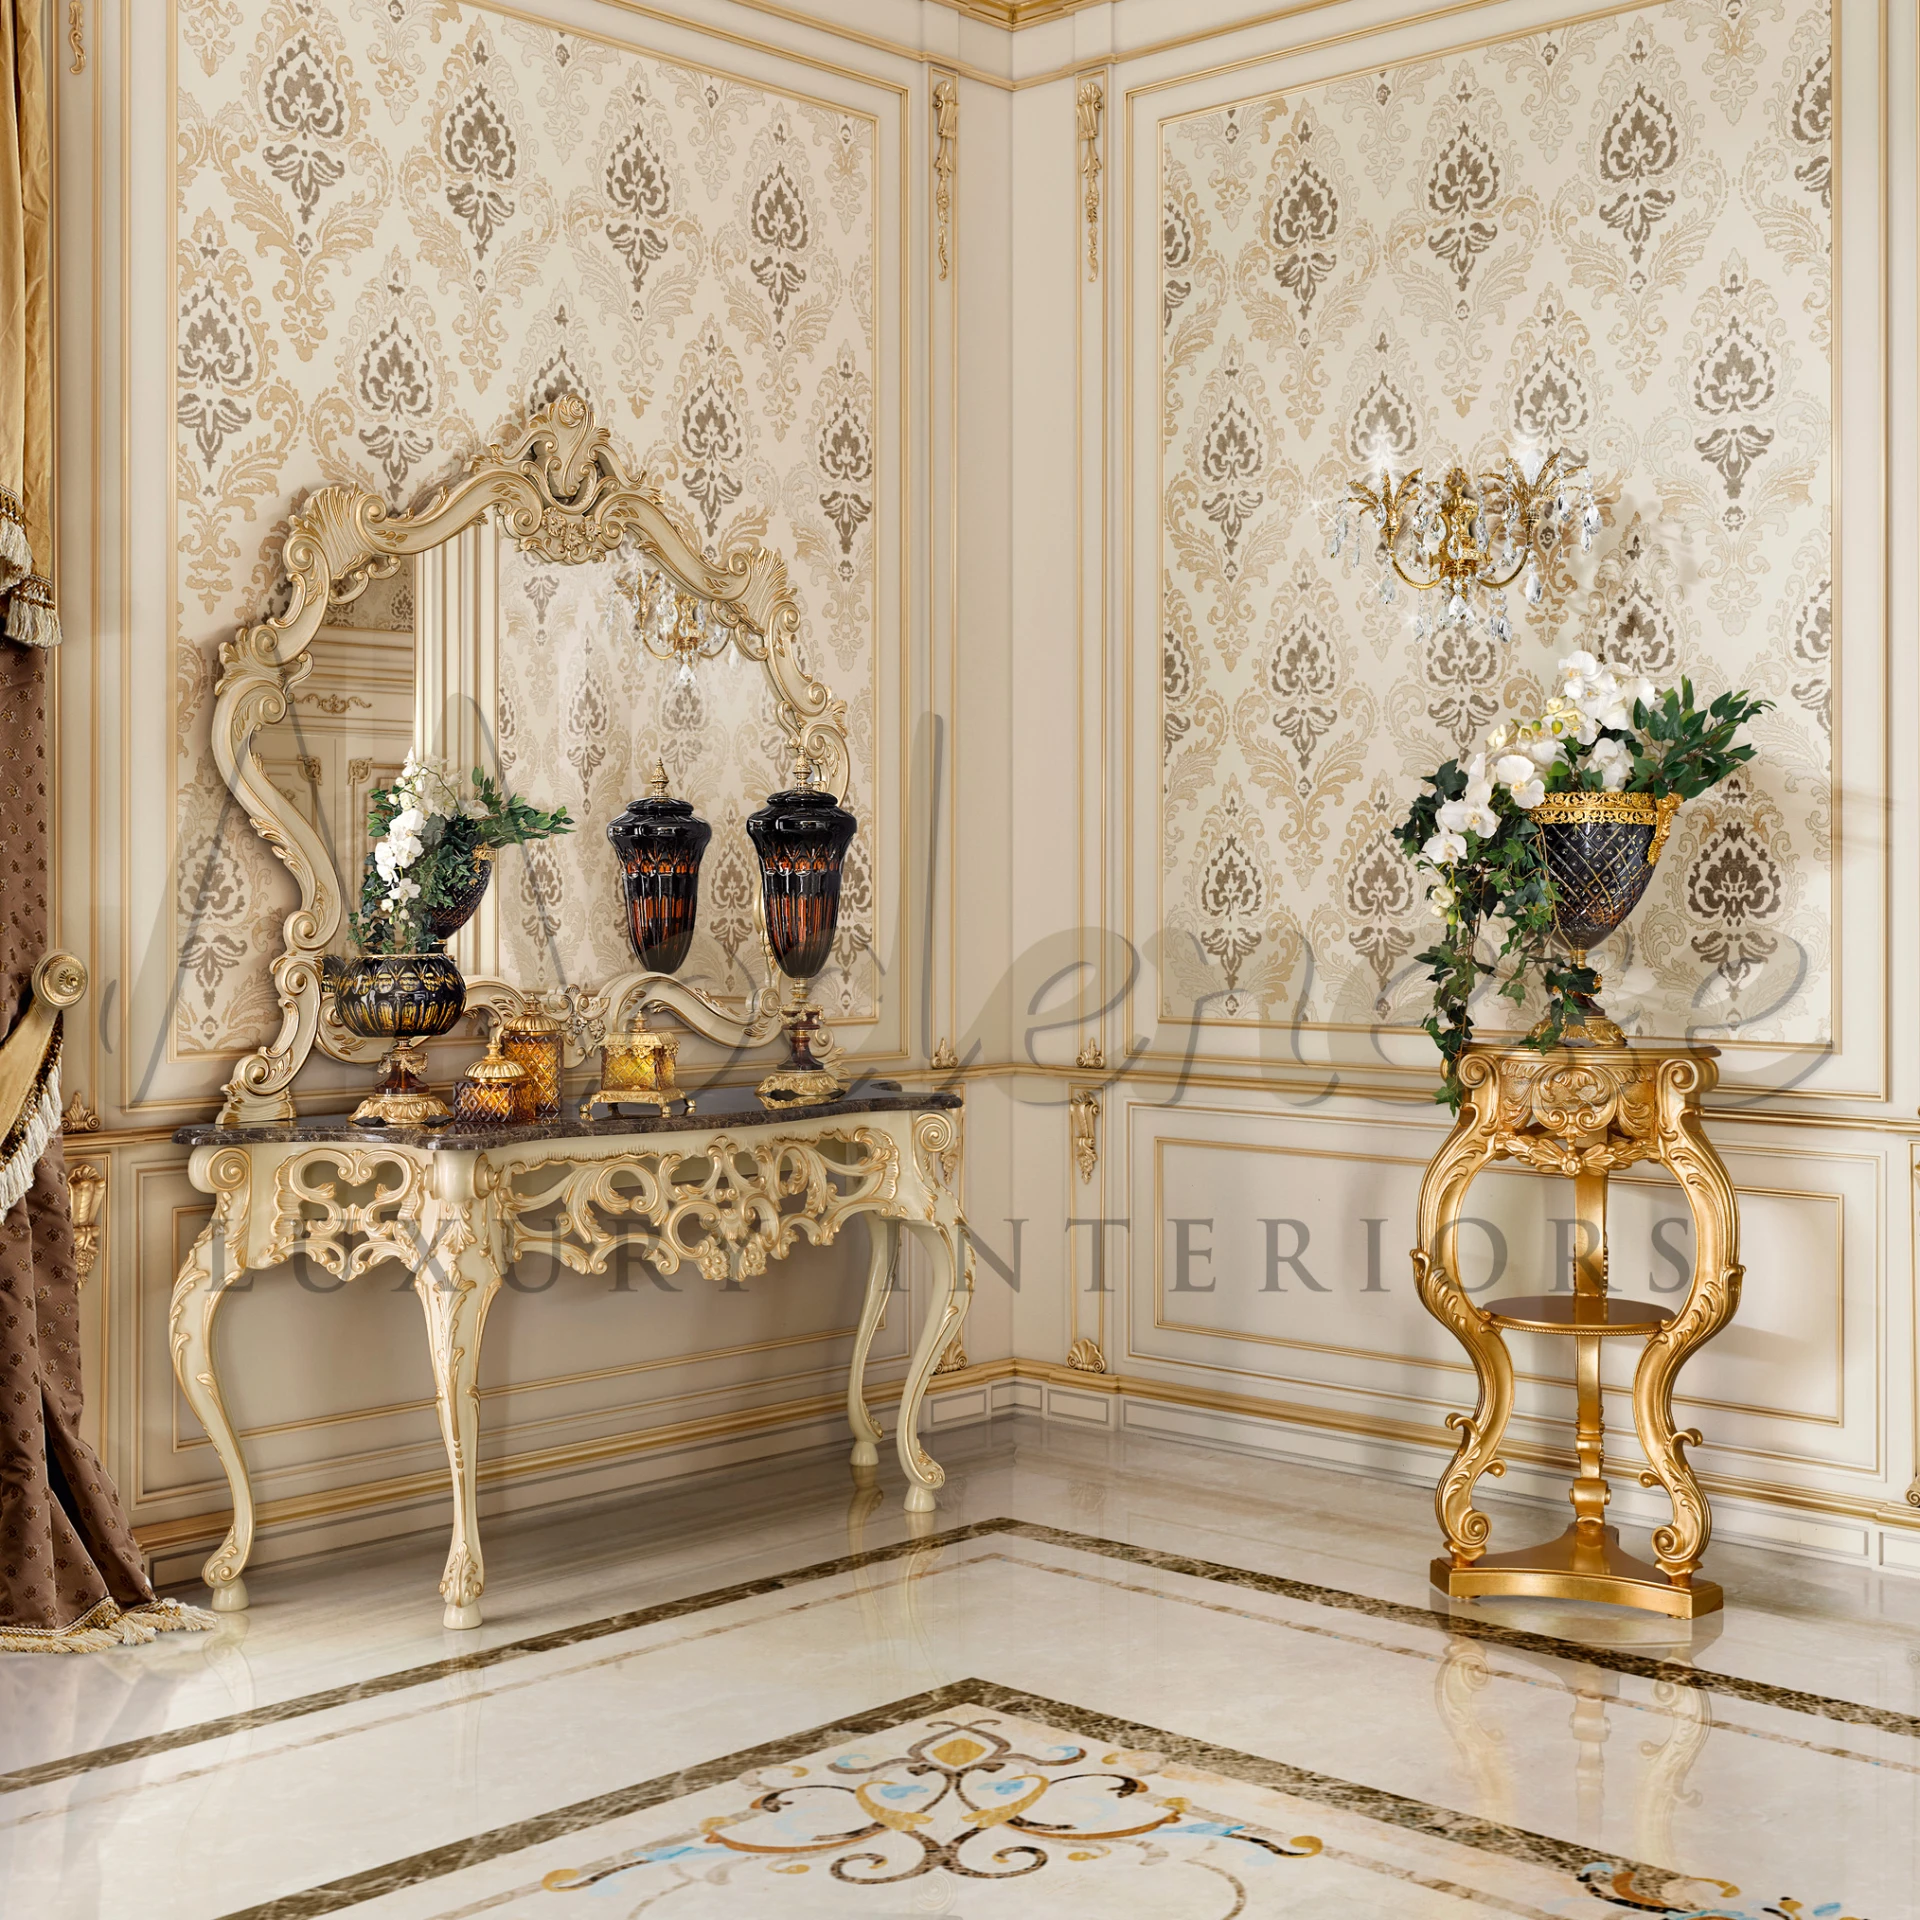 Luxurious Italian-designed Gold Leaf Console, perfect for adding a touch of refined Italian taste to your home decor.